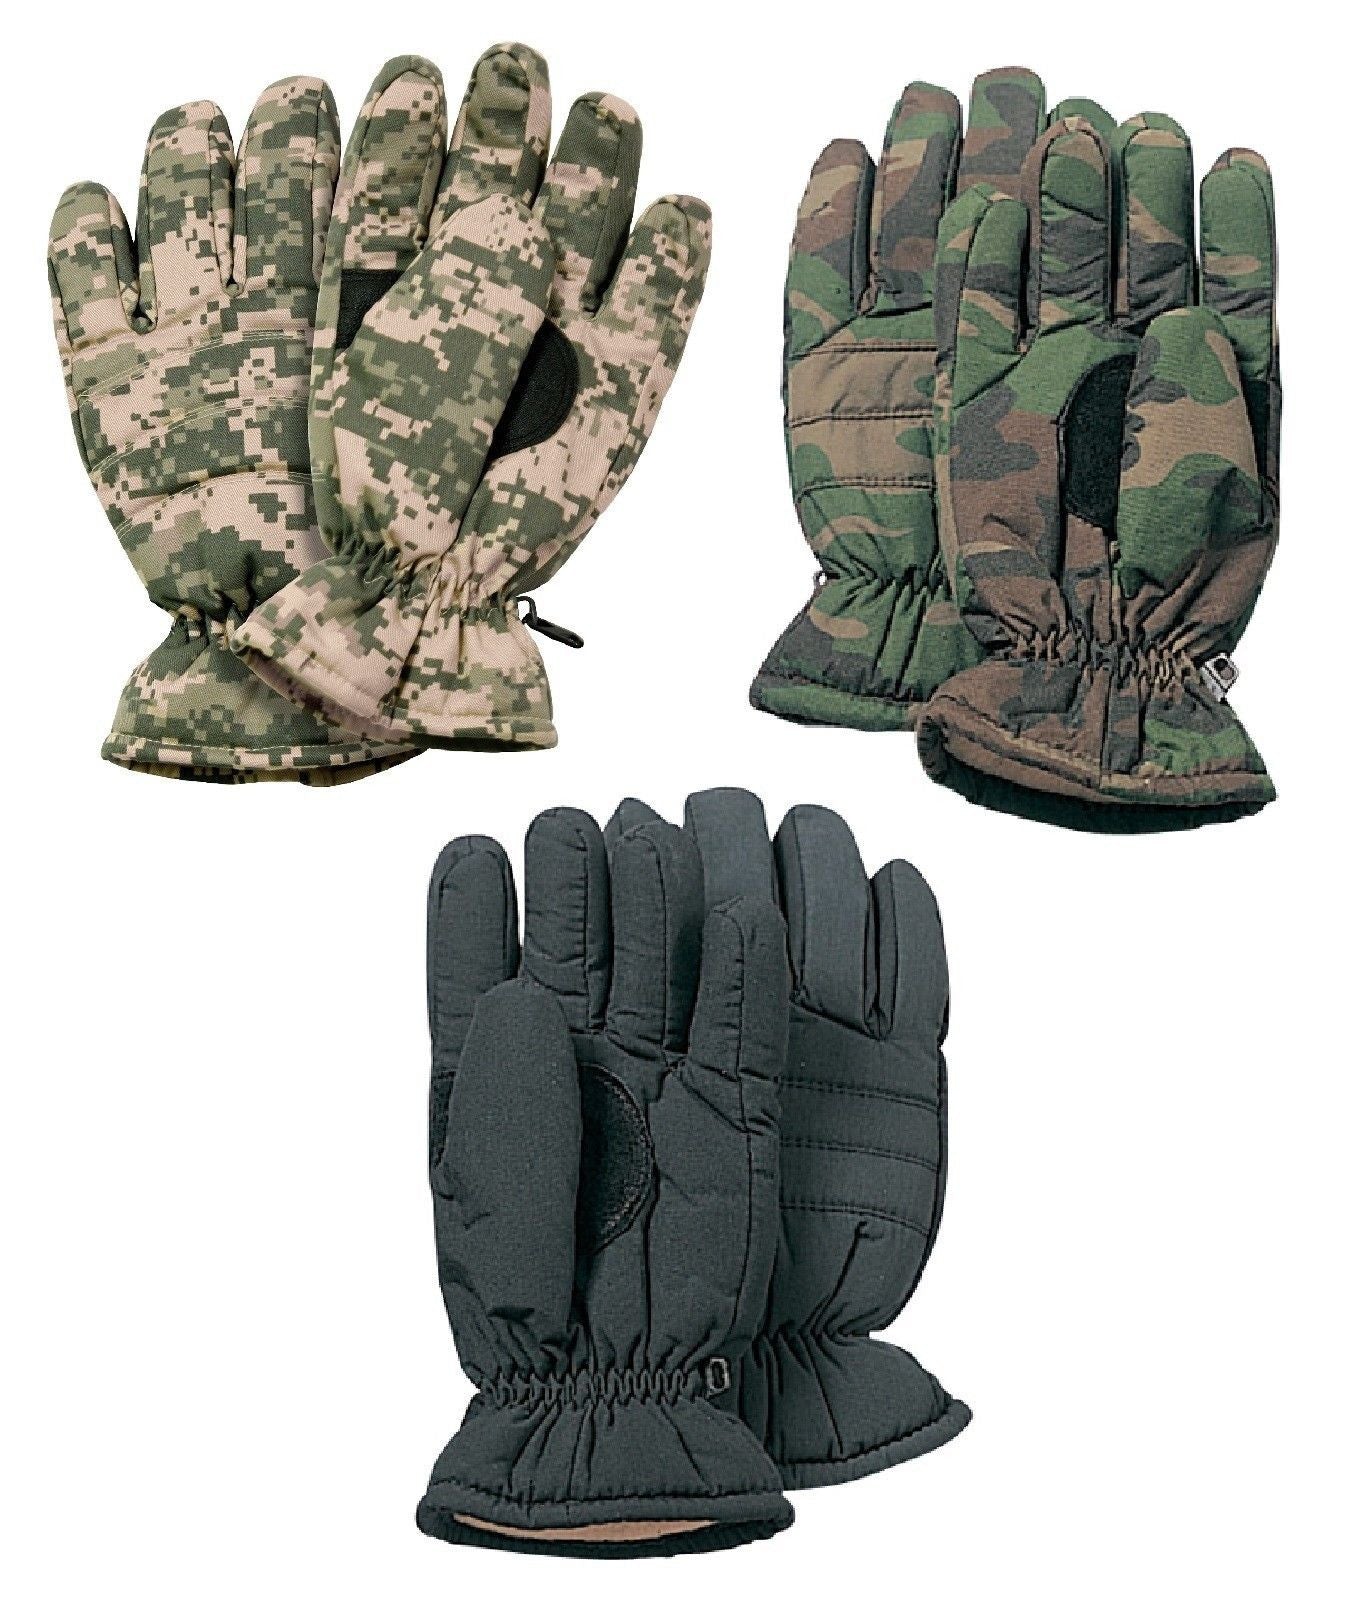 Insulated Hunting Glove Cold Weather Mitten